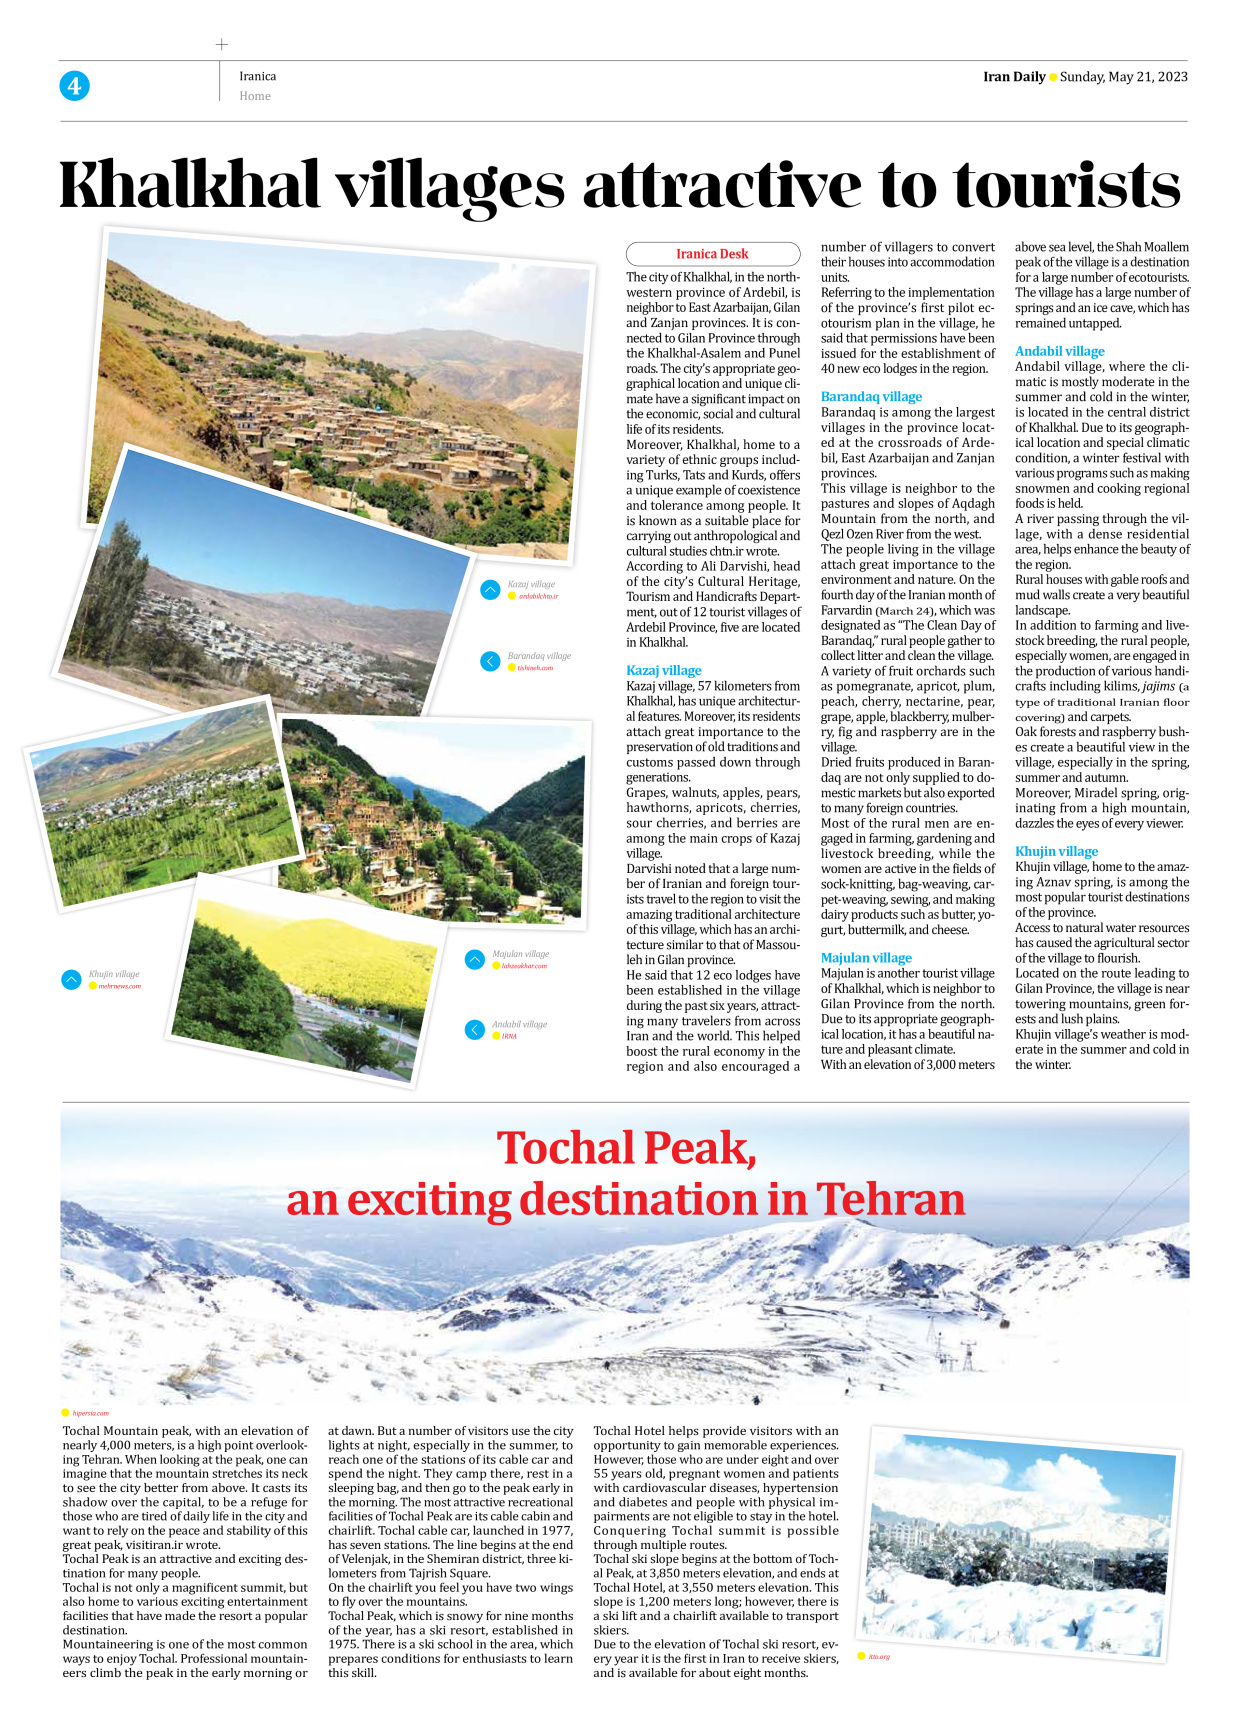 Iran Daily - Number Seven Thousand Two Hundred and Ninety Six - 21 May 2023 - Page 4